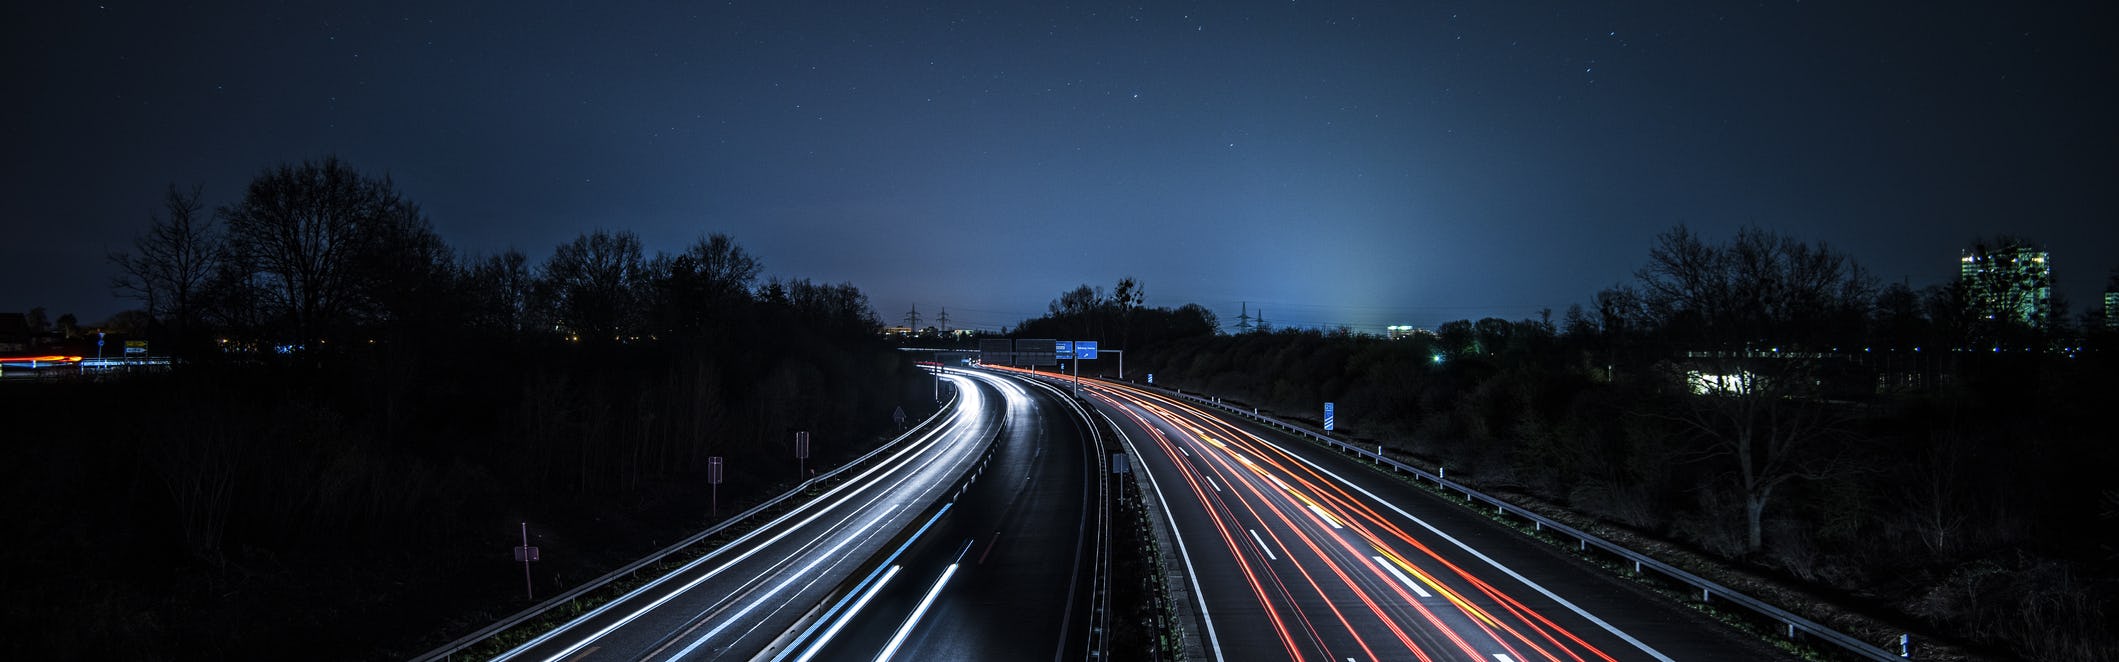 Road at night time with long exposure of vehicle lights